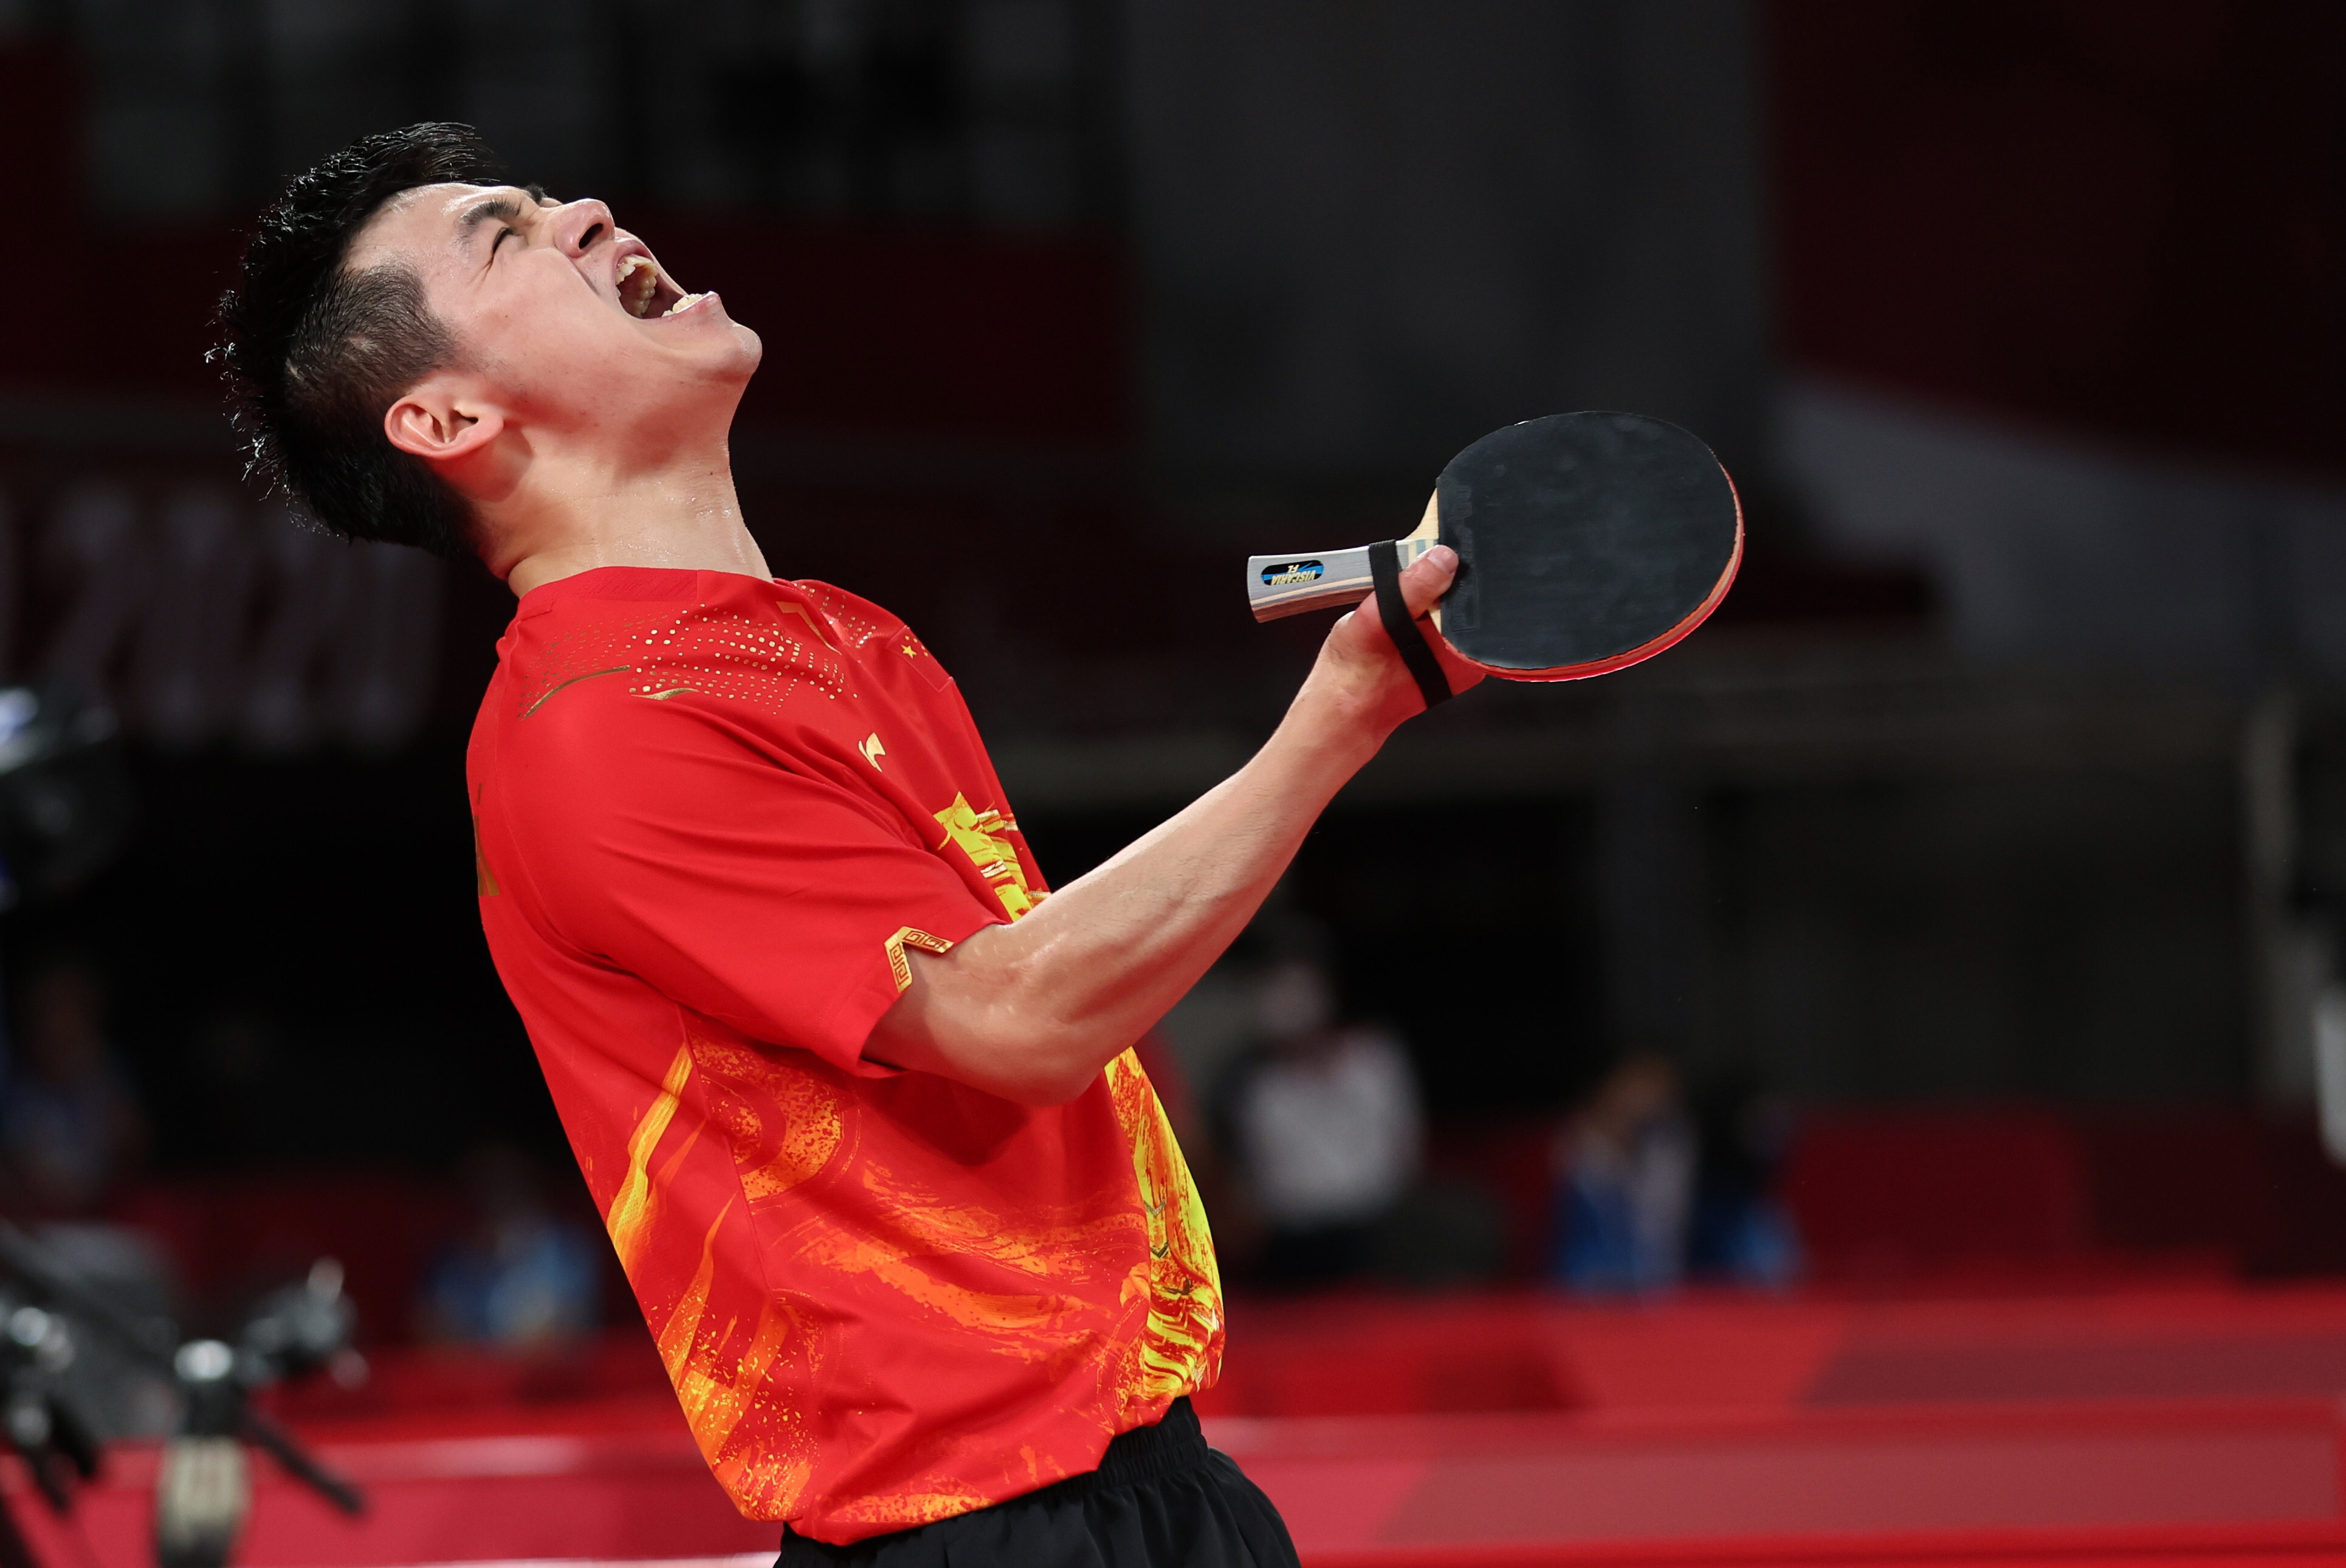 Shuai Zhao of China celebrates after winning gold in the men’s team table tennis at the Paralympic Games in Tokyo on September 2. Photo: Reuters